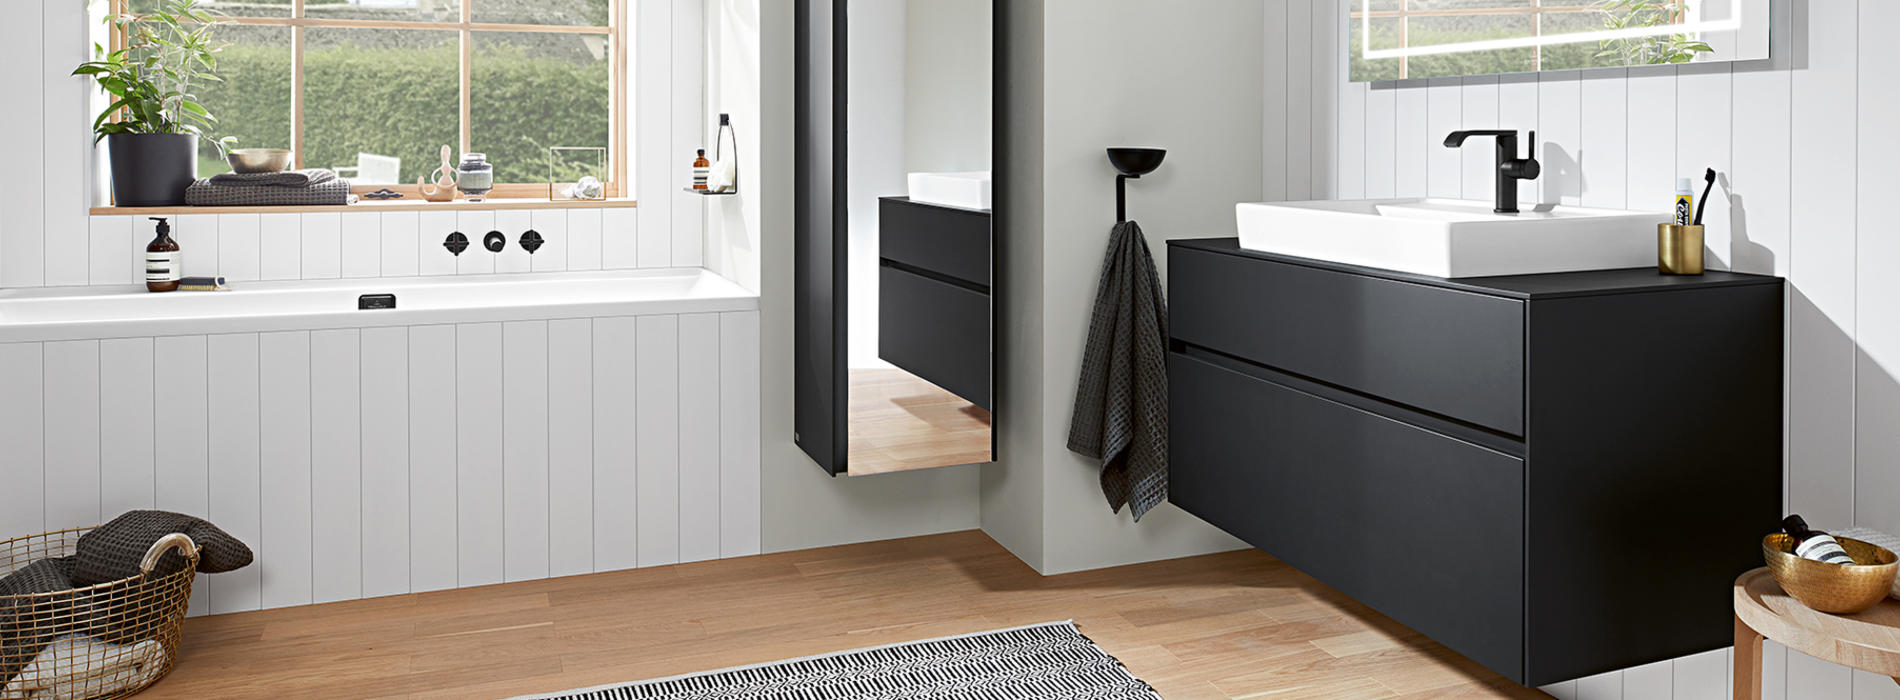 Villeroy Bathroom & Boch Crafted Kitchen Australia & Expertly - Products